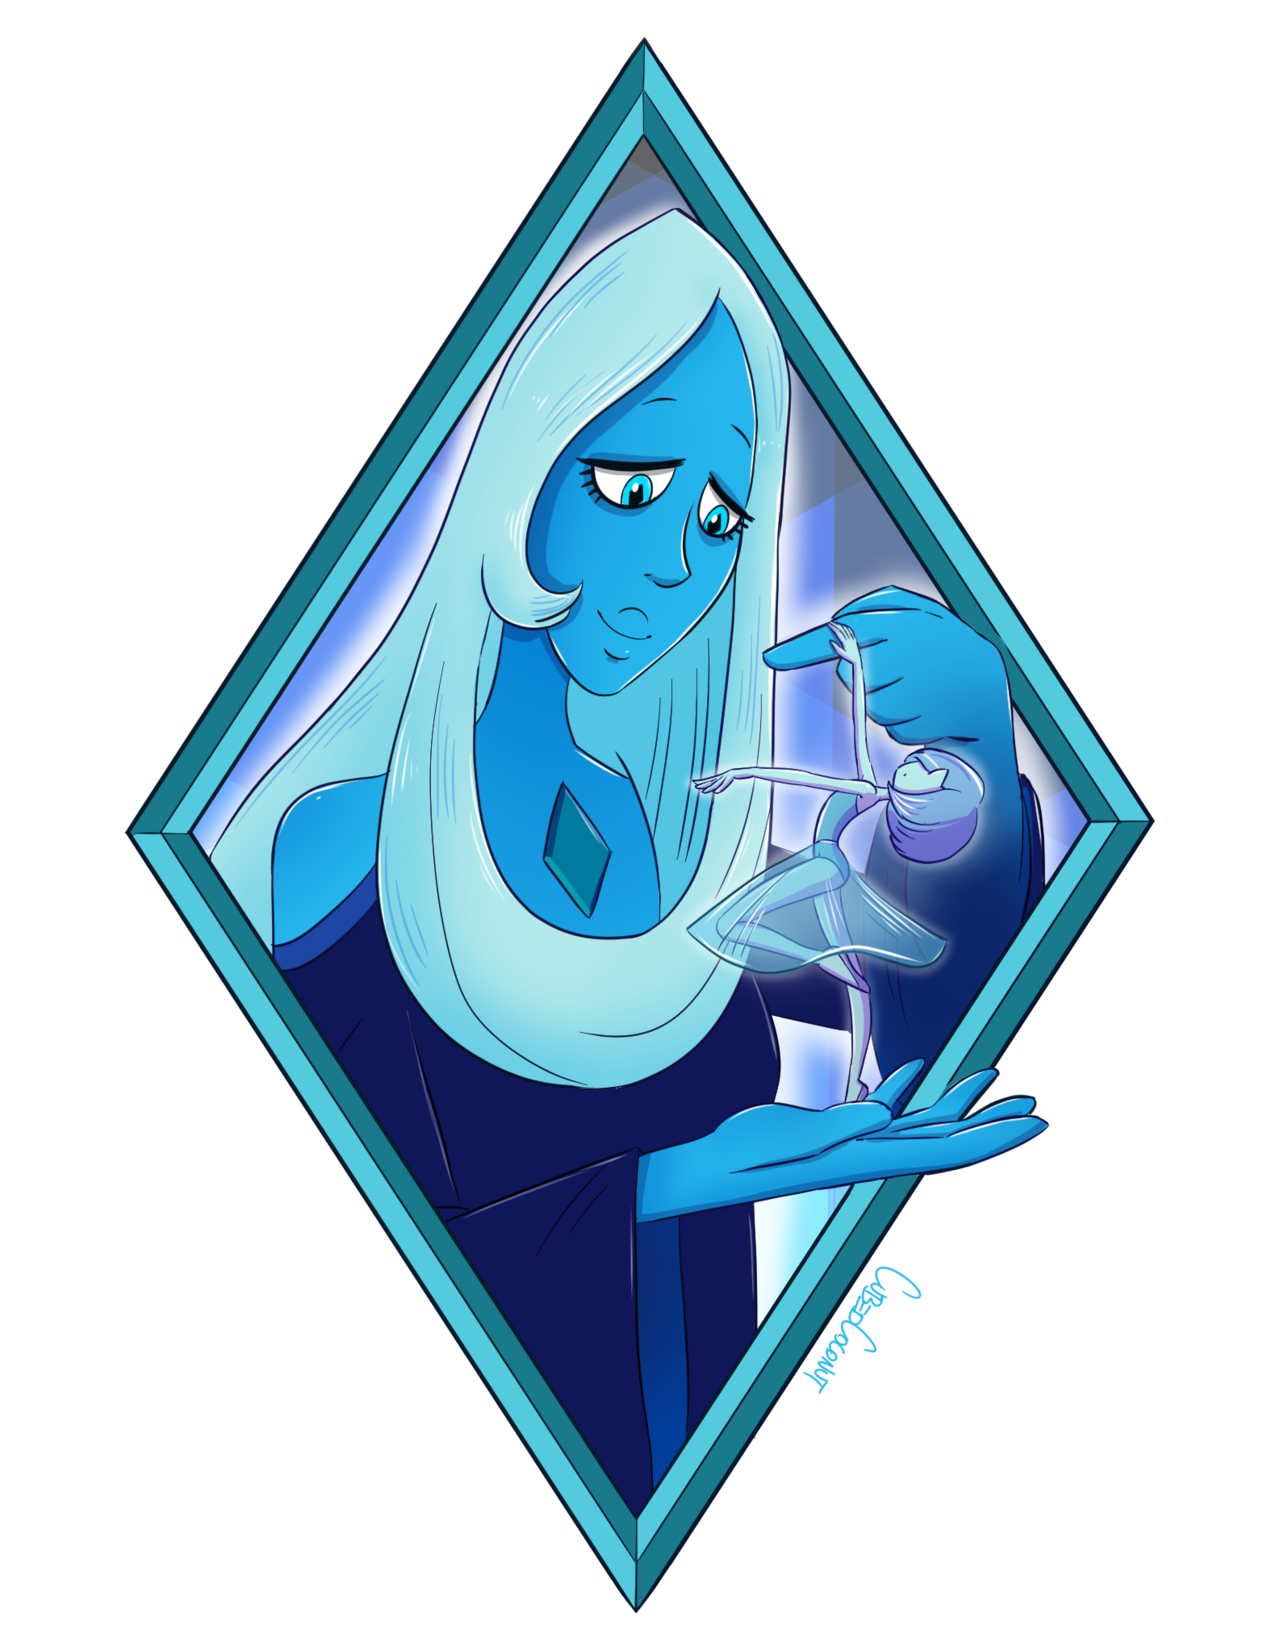 Blue Diamond and her pearl, commissioned as a tattoo idea! Thanks for commissioning